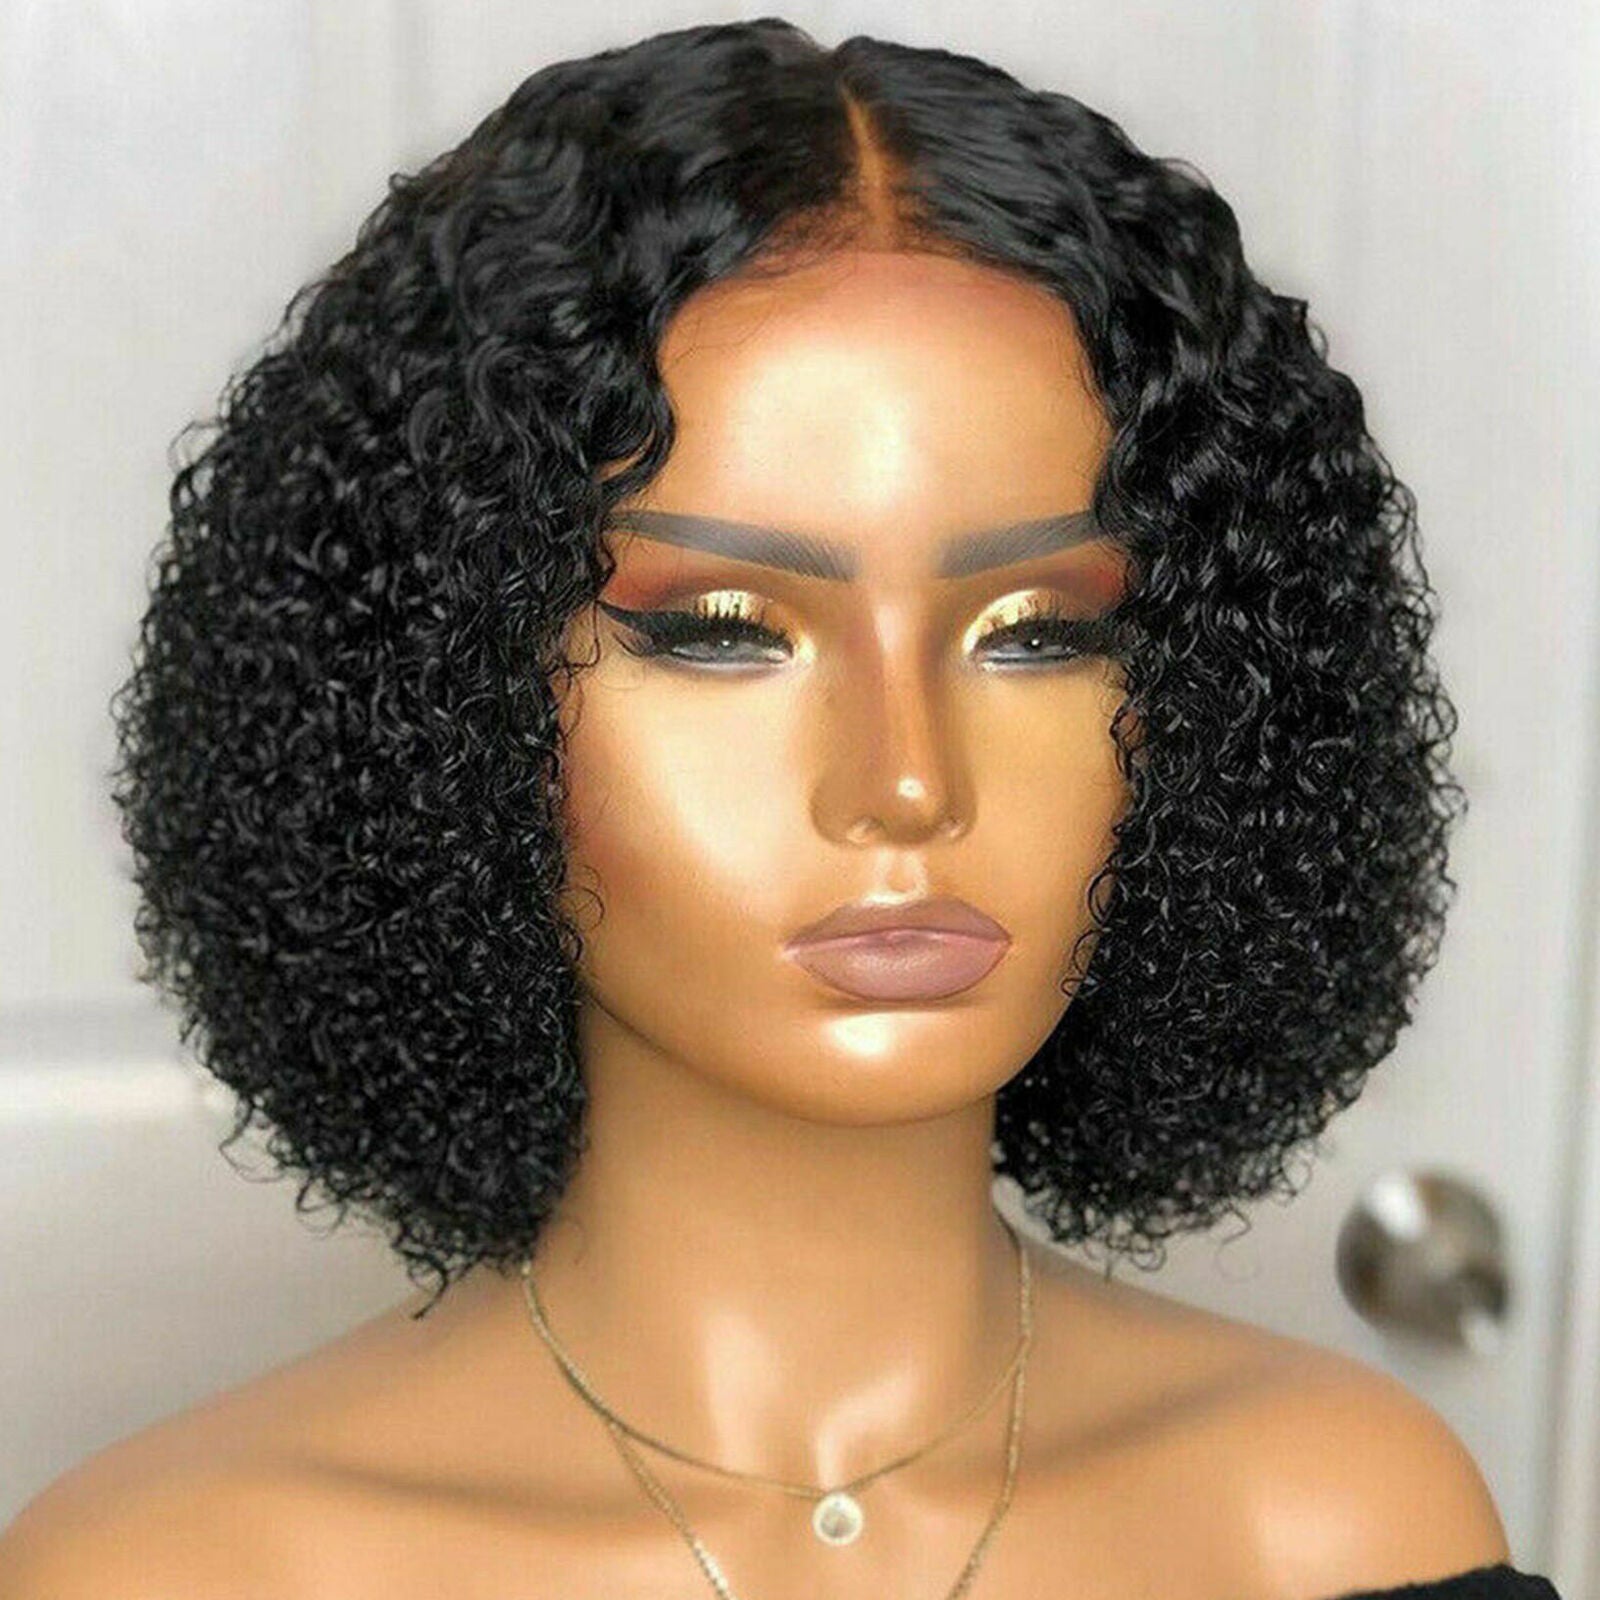 Women Black Wavy Curly Bob Short Hair Wig Synthetic Soft Natural Looking Wigs